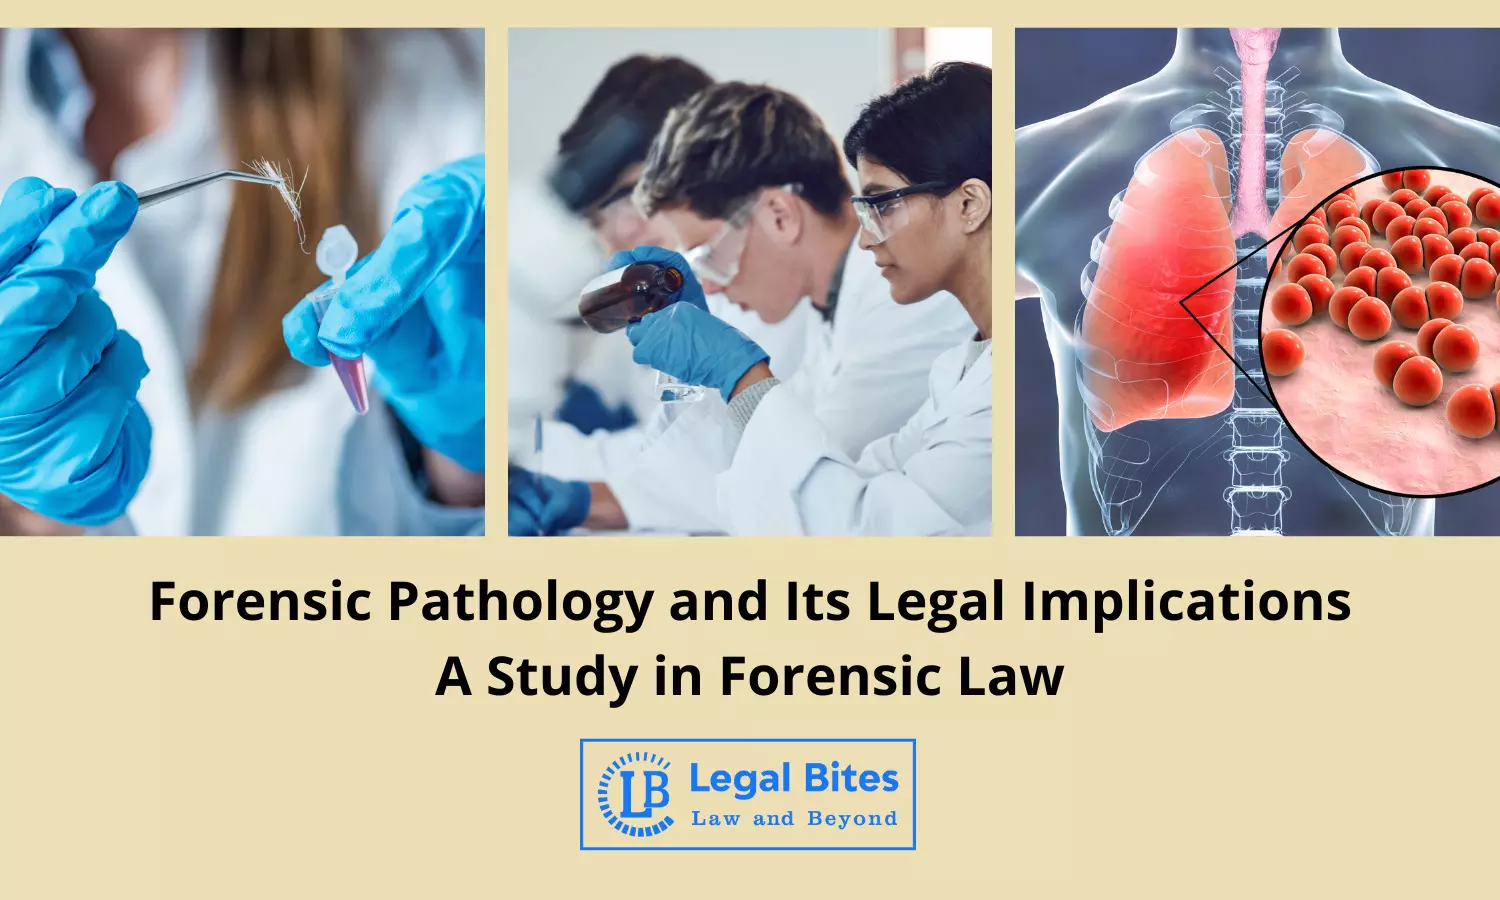 Forensic Pathology and Its Legal Implications: A Study in Forensic Law